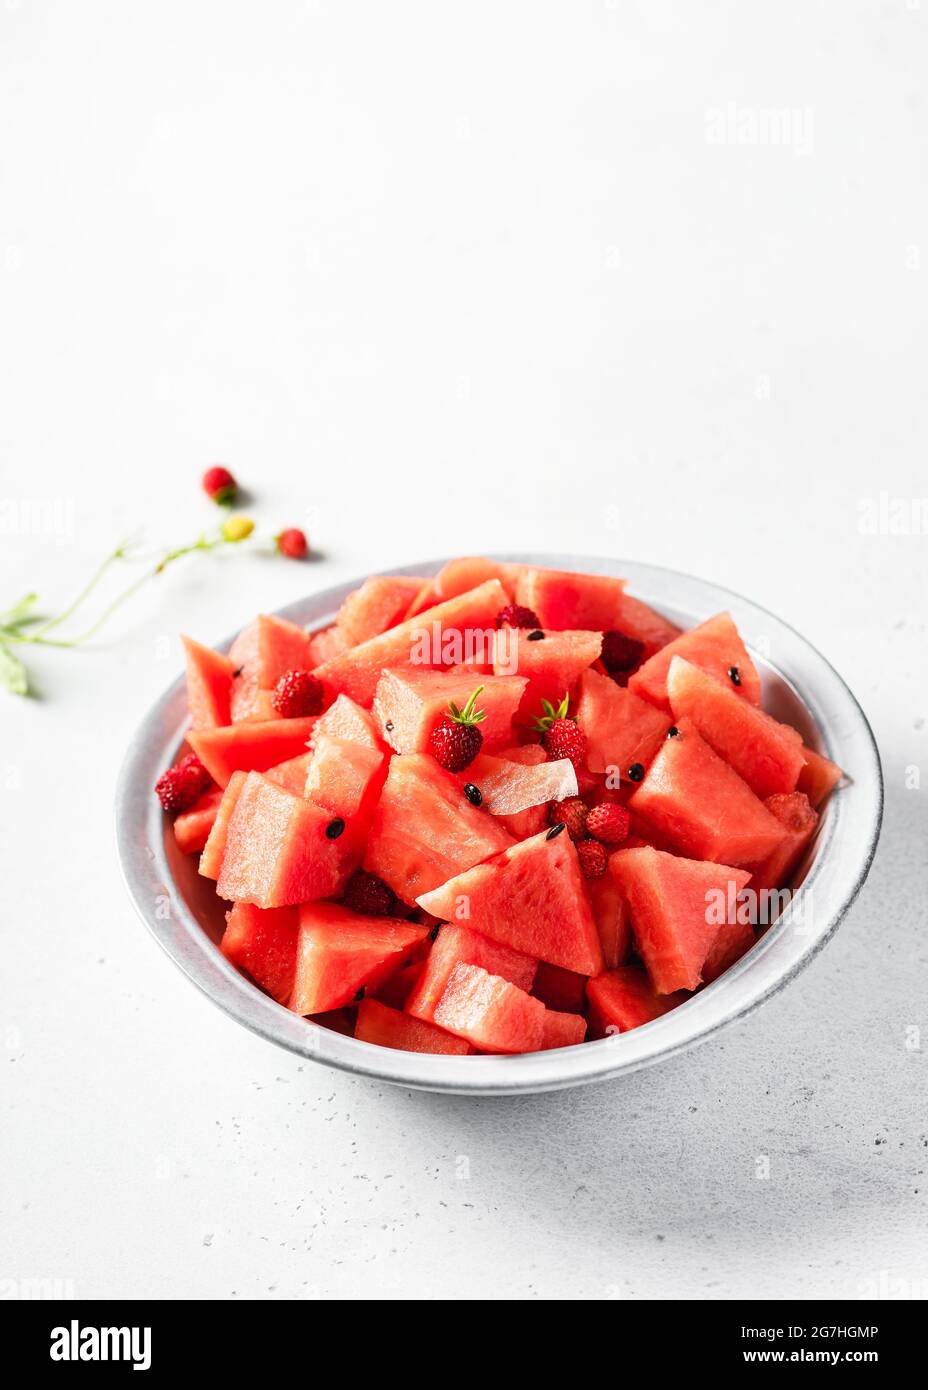 Summer fruit salad with organic watermelon and wild strawberries. Healthy food and lifestyle concept. Copy space. Stock Photo